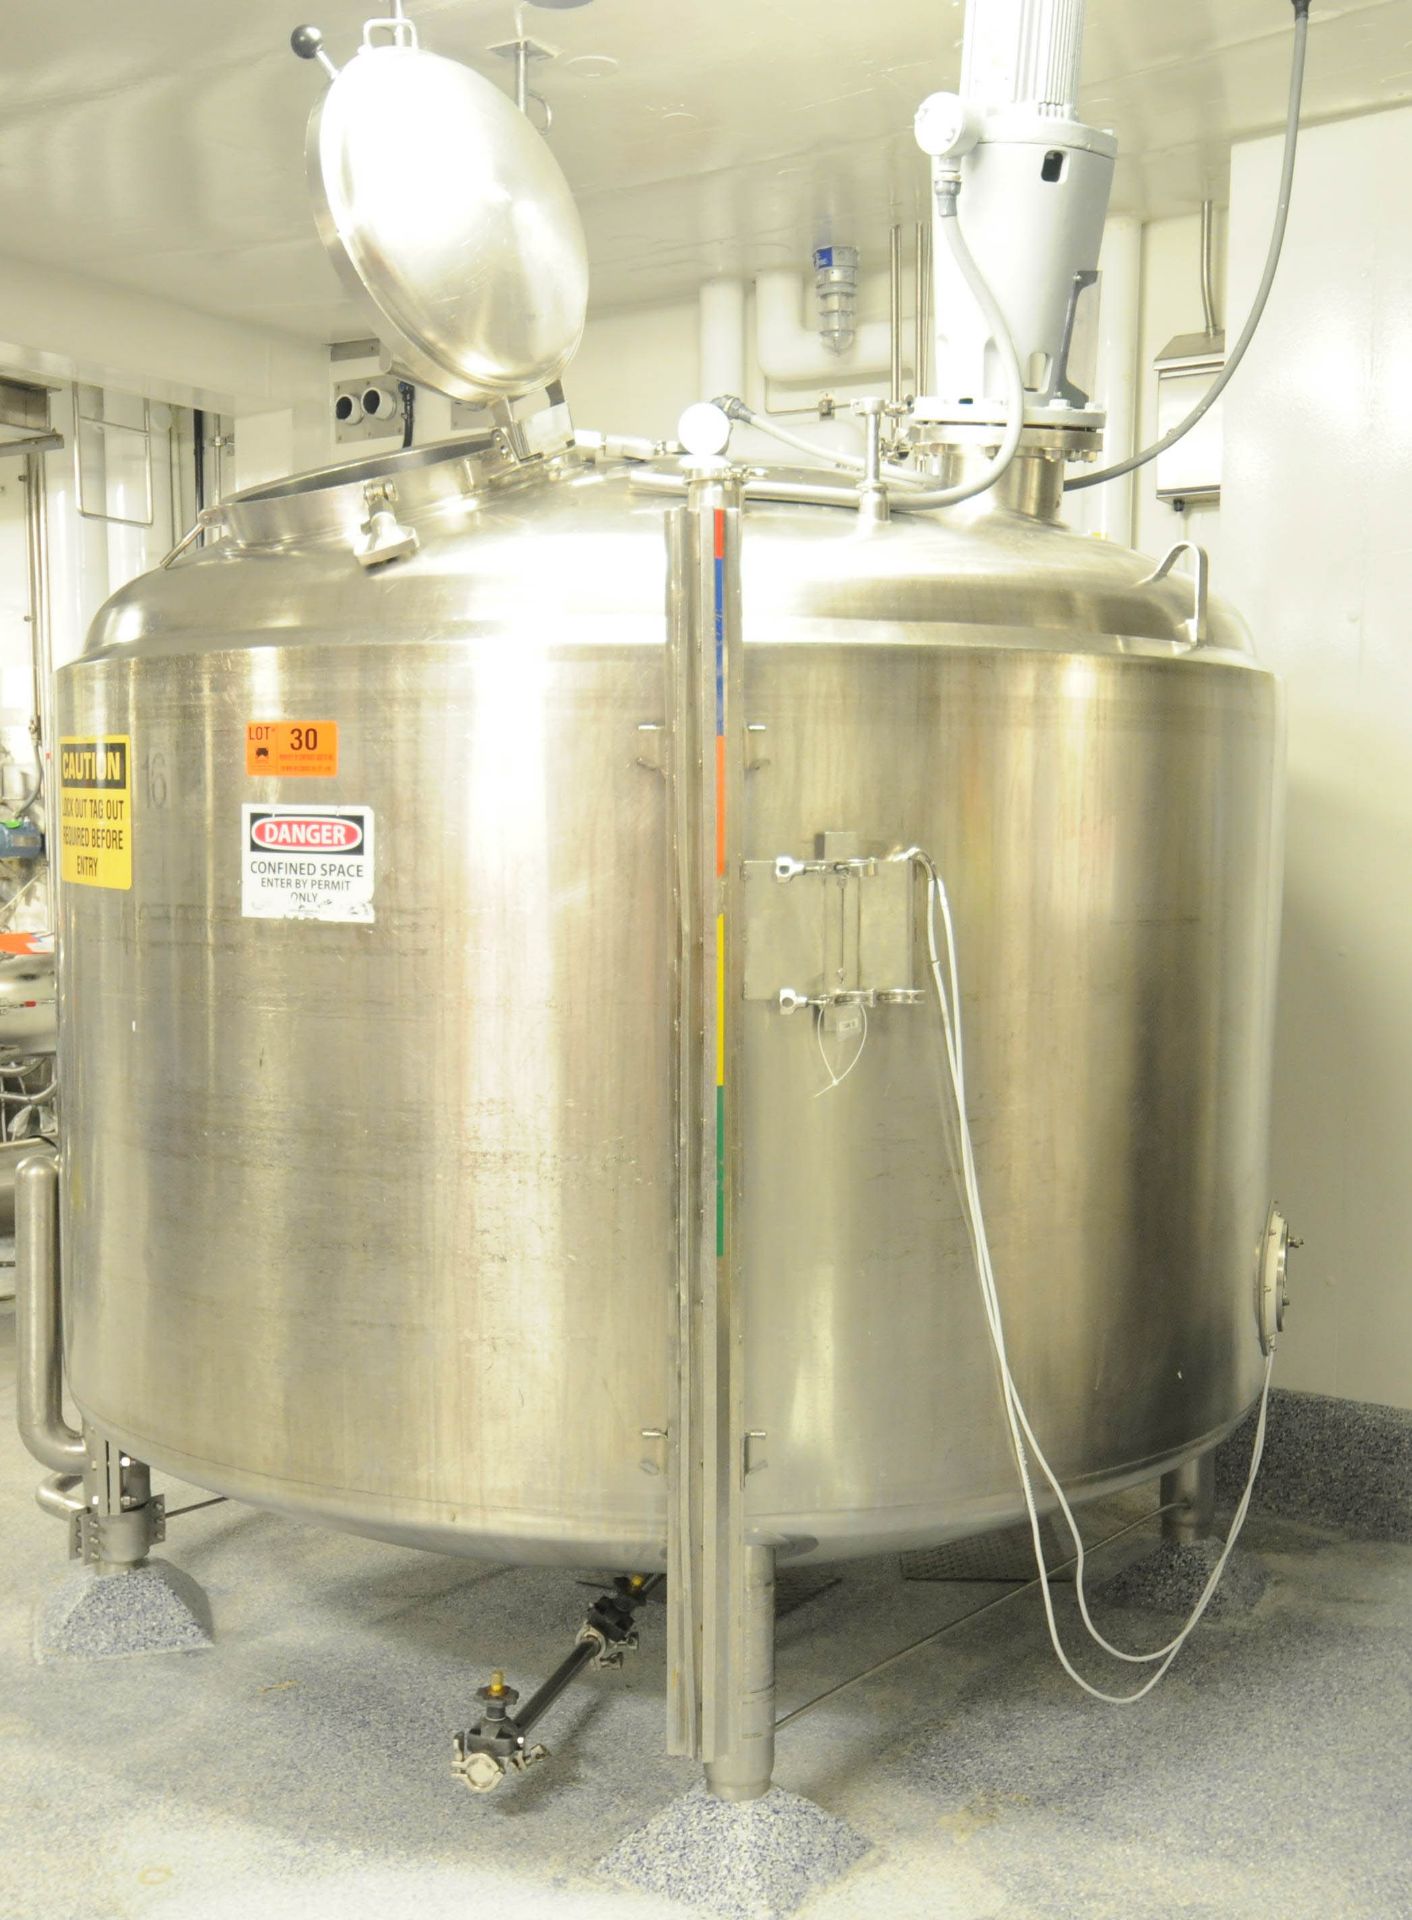 DCI T#16 (1999) (R&R 4/5/2016) STAINLESS STEEL JACKETED MIXING TANK WITH 6000 LITER CAPACITY,